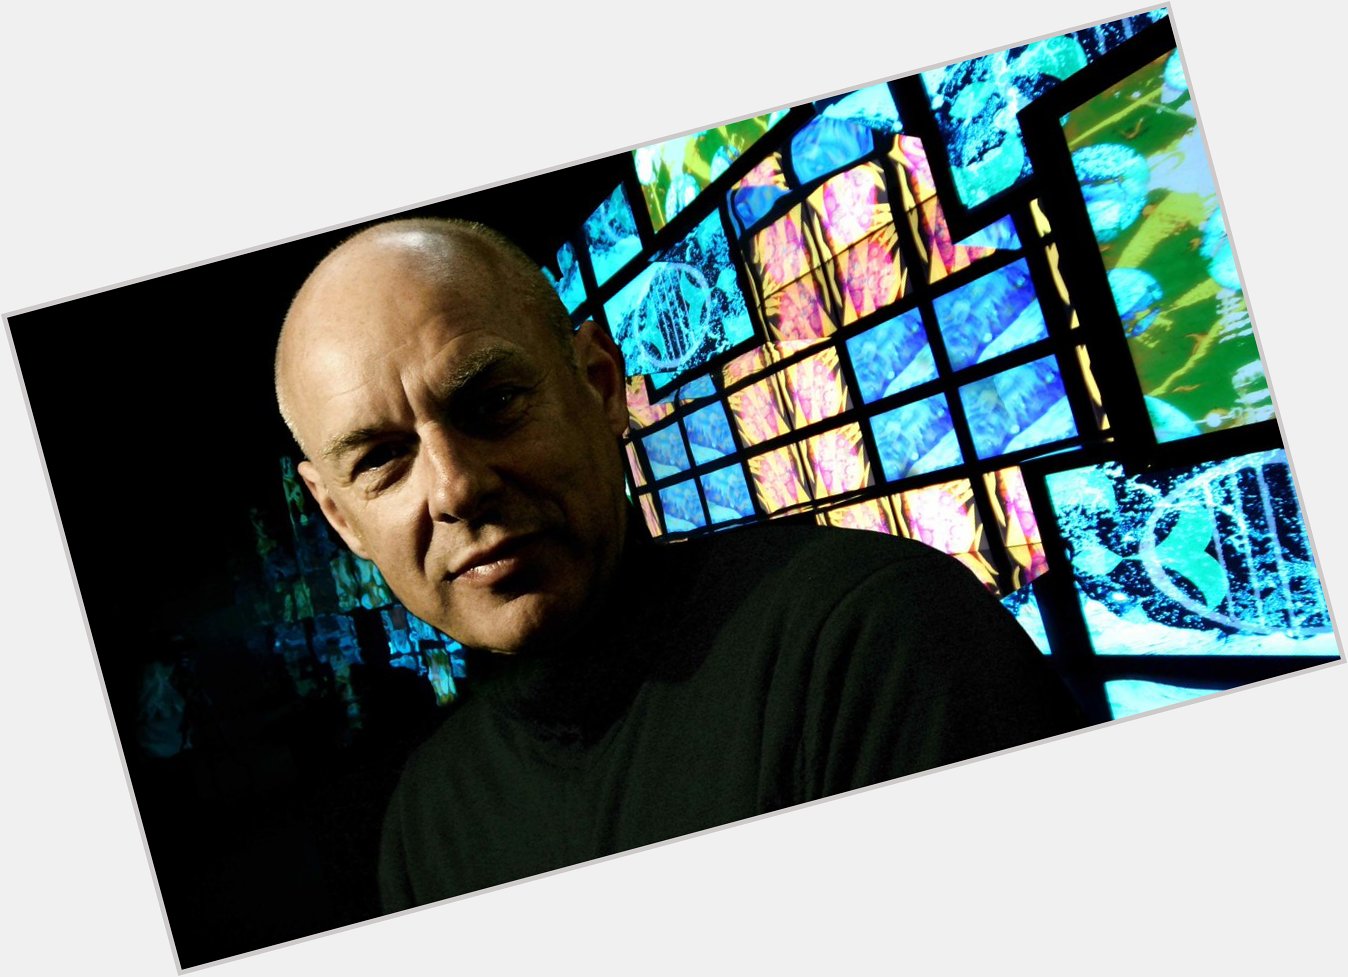  When driven backwards, he becomes the One... Happy 69th birthday to Father Brian Eno today :-) 